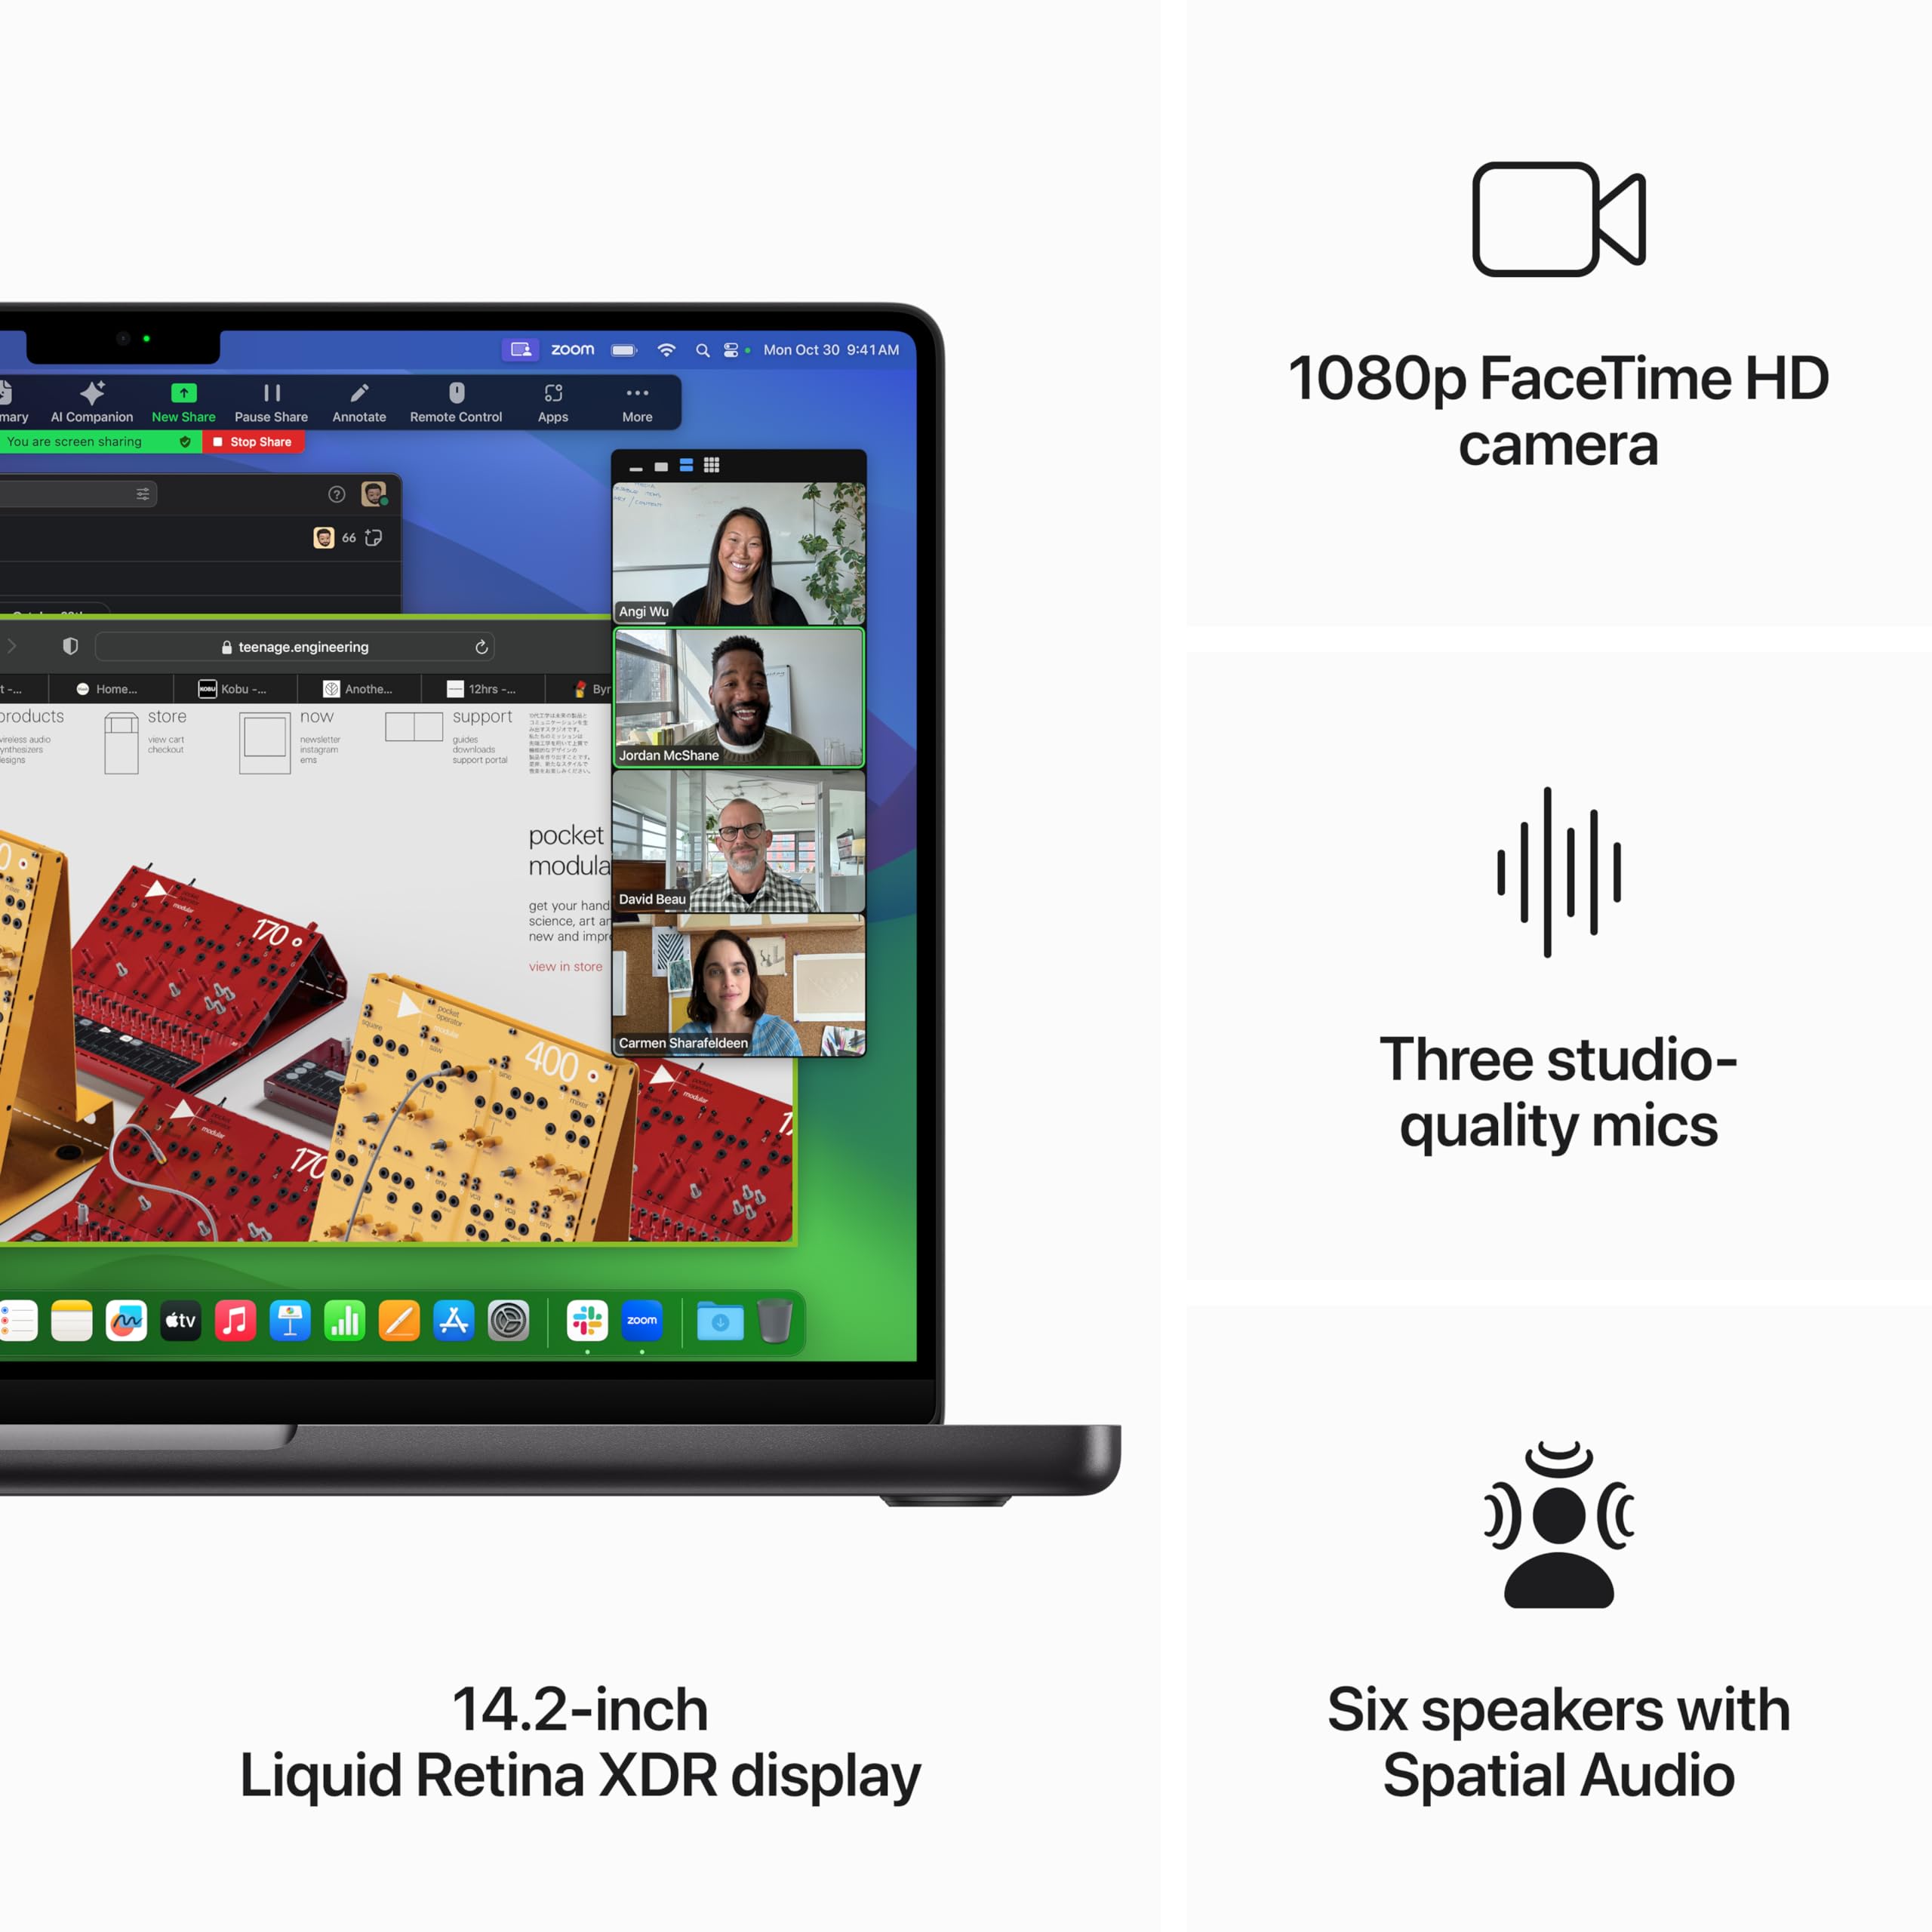 Apple 2023 MacBook Pro Laptop M3 Pro chip with 11‑core CPU, 14‑core GPU: 14.2-inch Liquid Retina XDR Display, 18GB Unified Memory, 512GB SSD Storage. Works with iPhone/iPad; Space Black